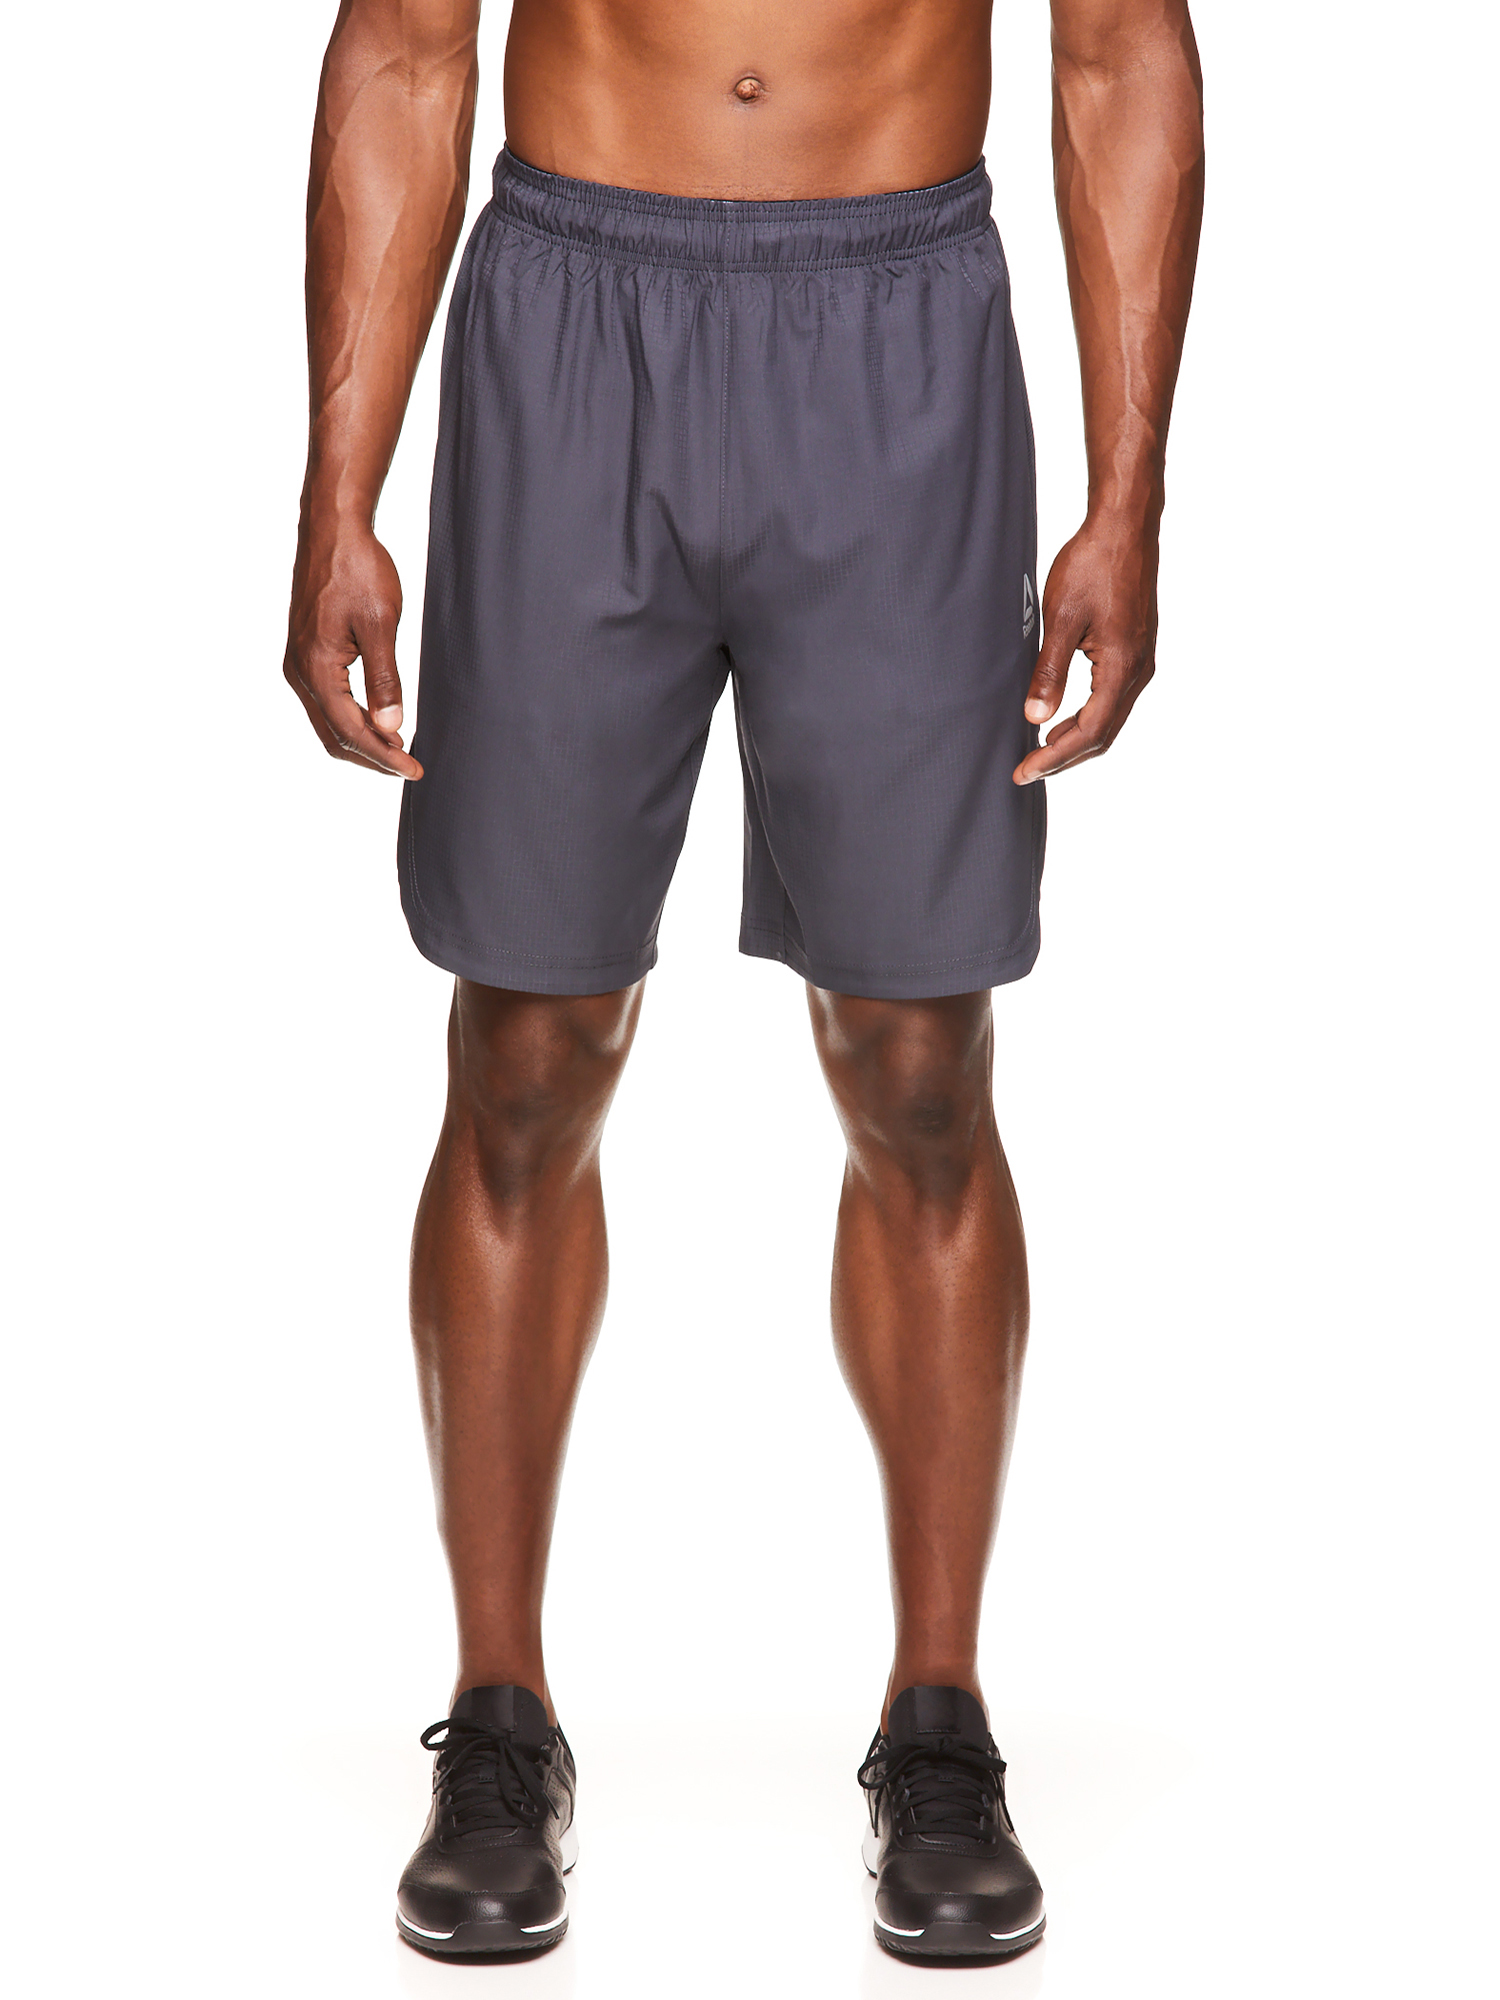 Reebok Men's and Big Men's Active Textured Woven Shorts, 9" Inseam, up to Size 3XL - image 1 of 4